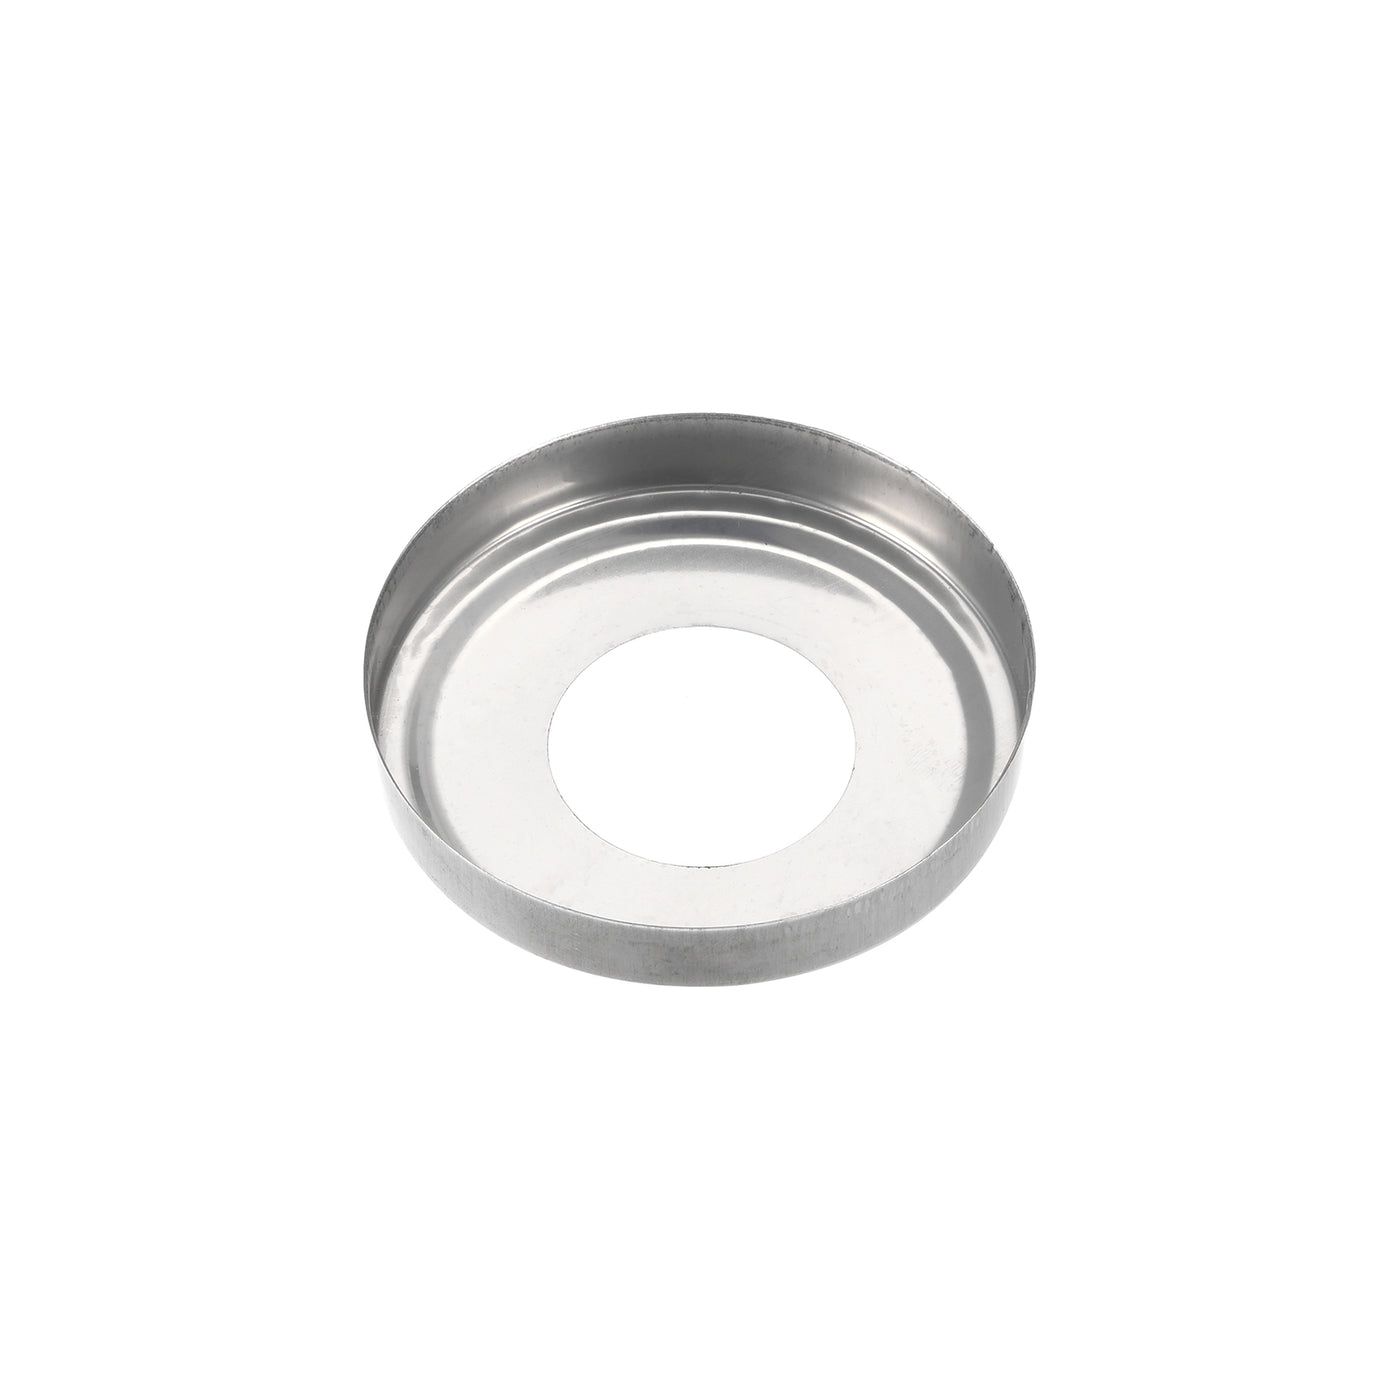 Uxcell Uxcell Round Escutcheon Plate, 8pcs 123 x 21mm 201 Stainless Steel Water Pipe Cover for 76.5mm Diameter Pipe